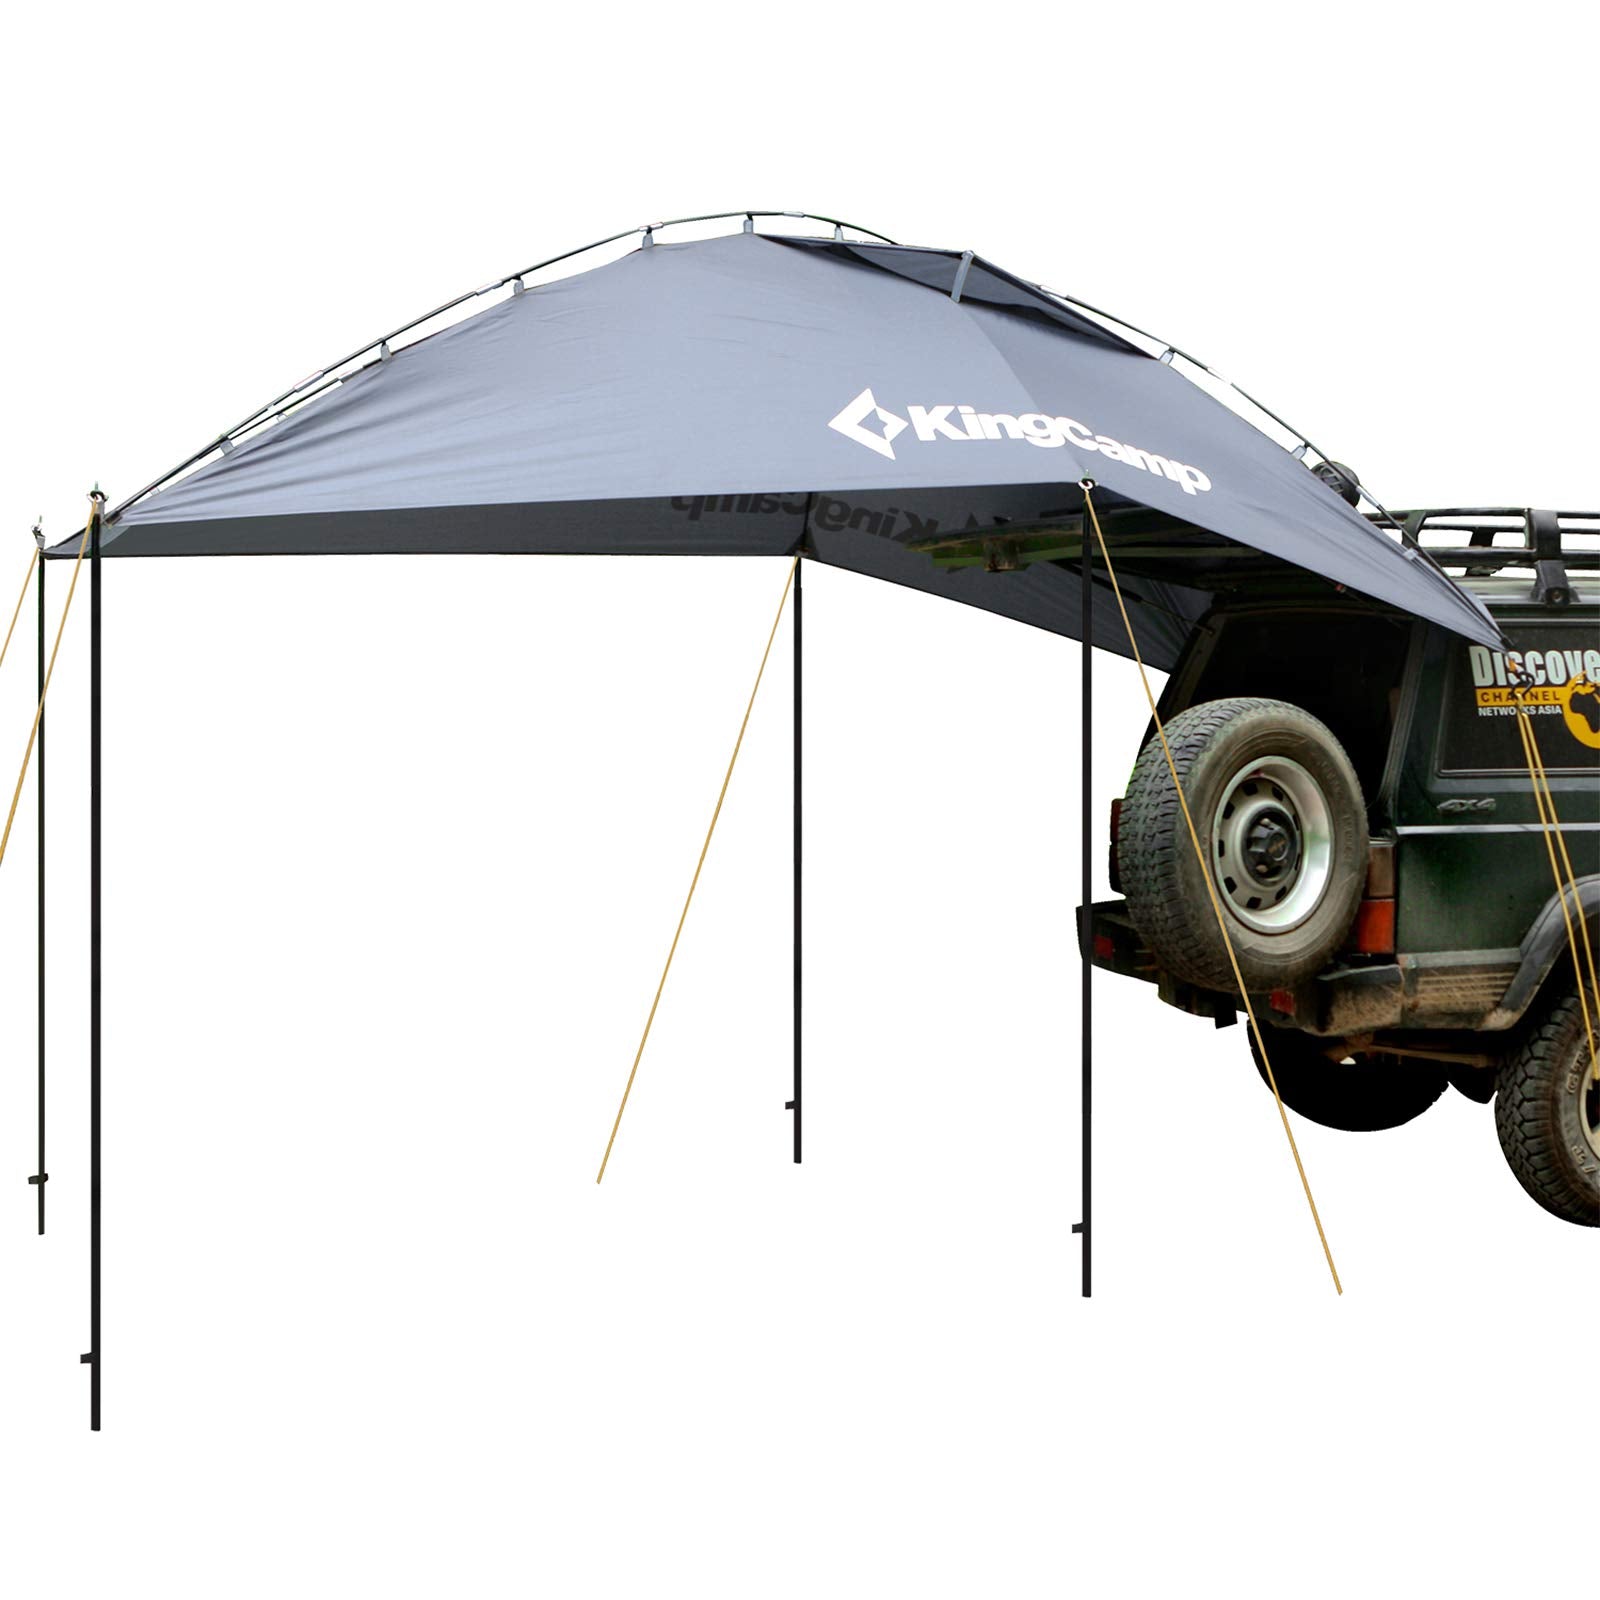 Buy KingCamp Outdoor Awning Shelter SUV Tent Auto Canopy